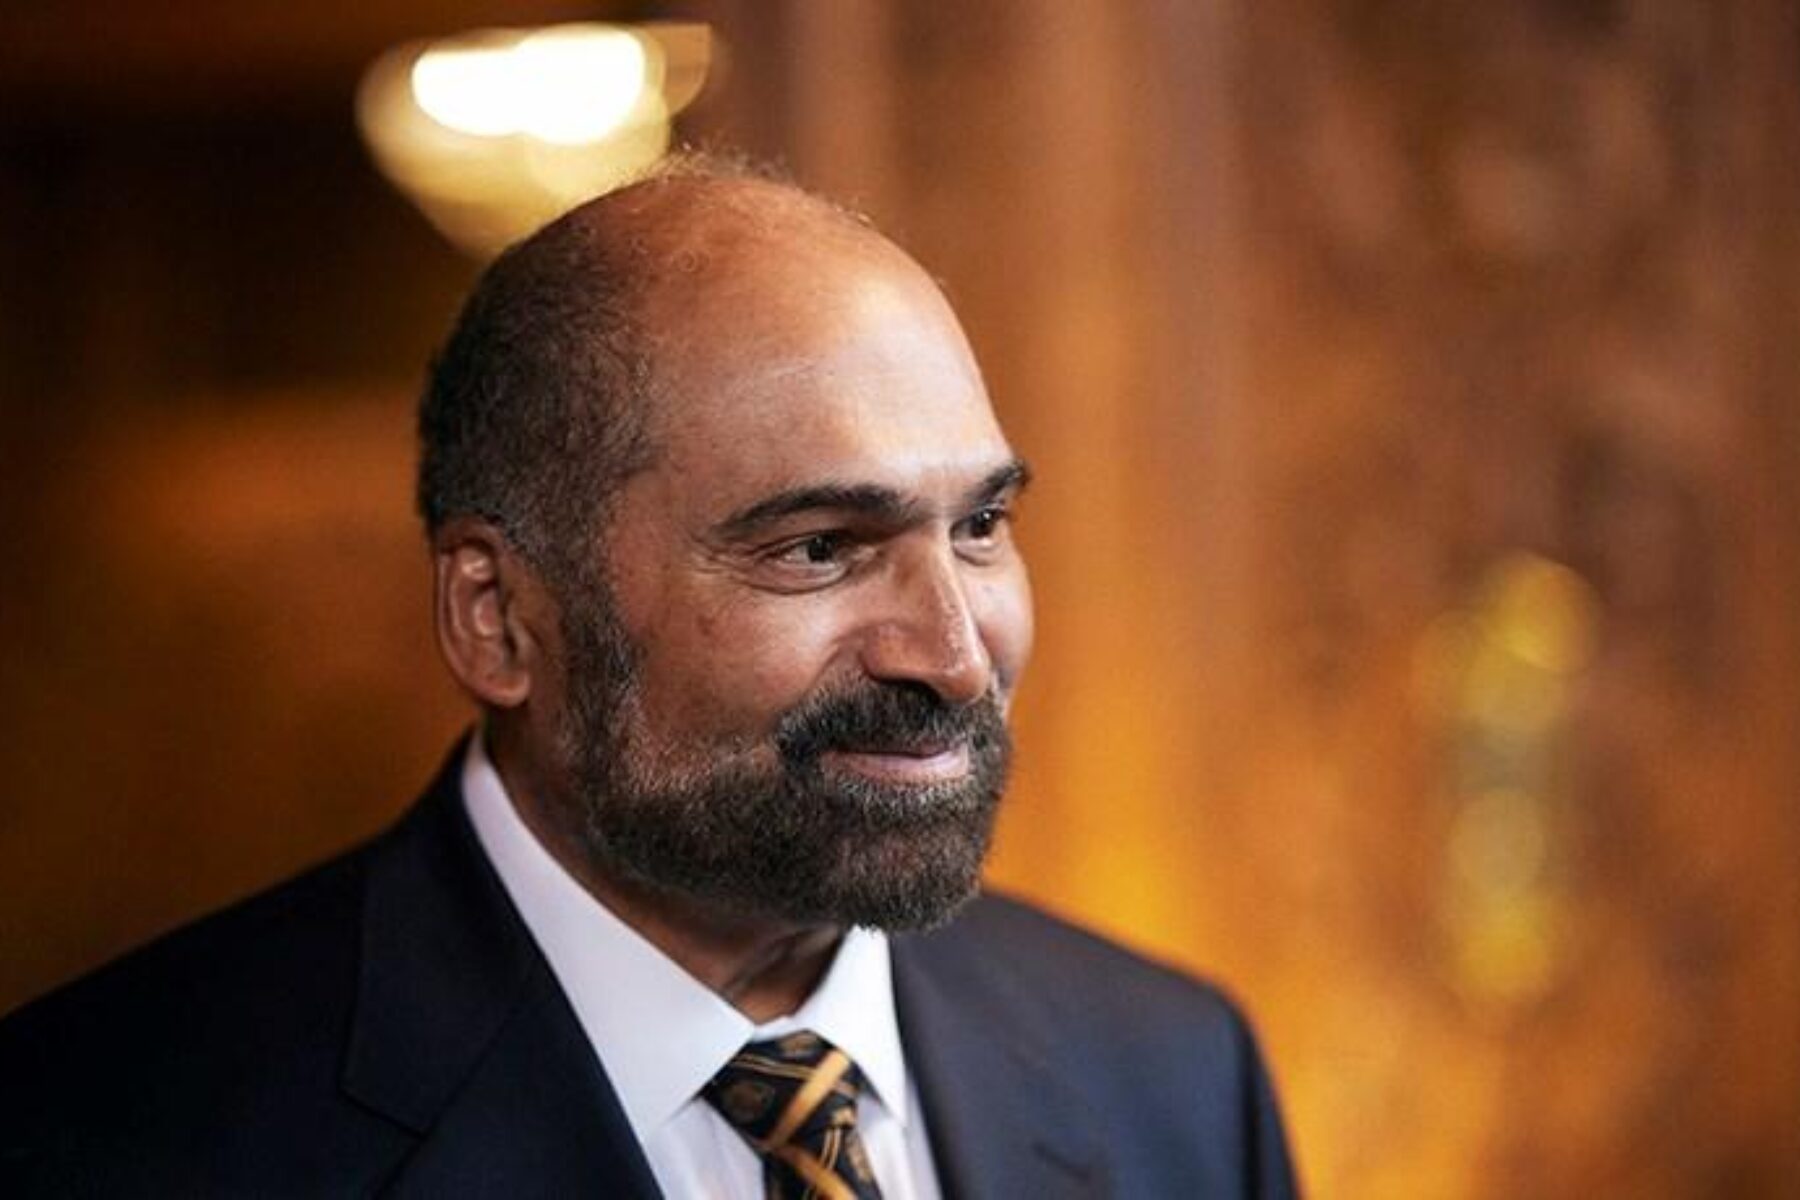 Franco Harris supported the trails and bicycling community in many ways, including as a board member for Rails-to-Trails Conservancy from 1992 to 1997, and as the owner of the Pittsburgh Power bike racing team in the early 1990s. | Photo courtesy Governor Tom Wolf | CC BY 2.0